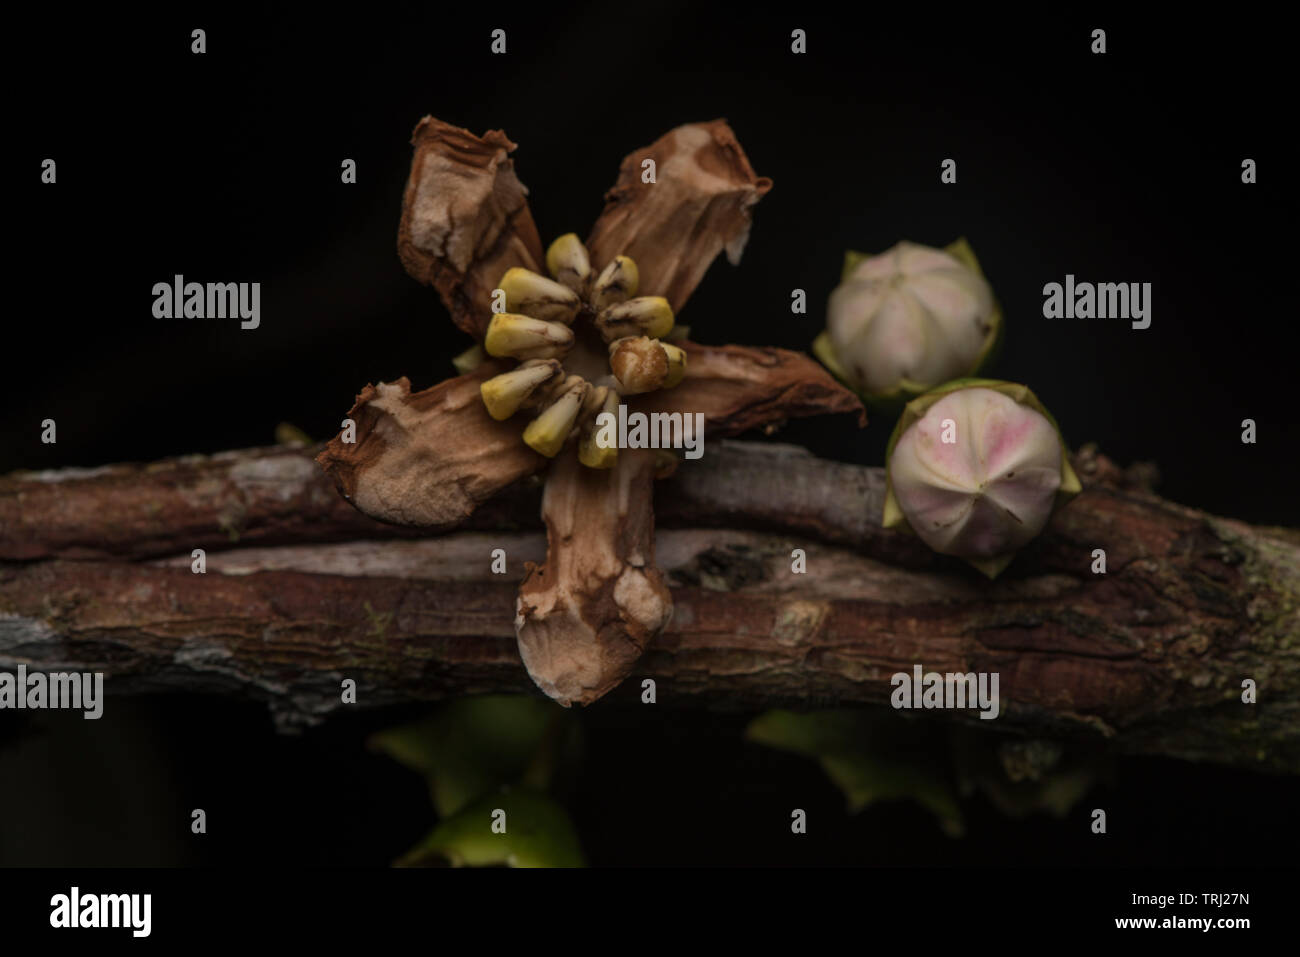 Macro photos of an unusual flowering tree from the Amazon rainforest in Ecuador. Stock Photo